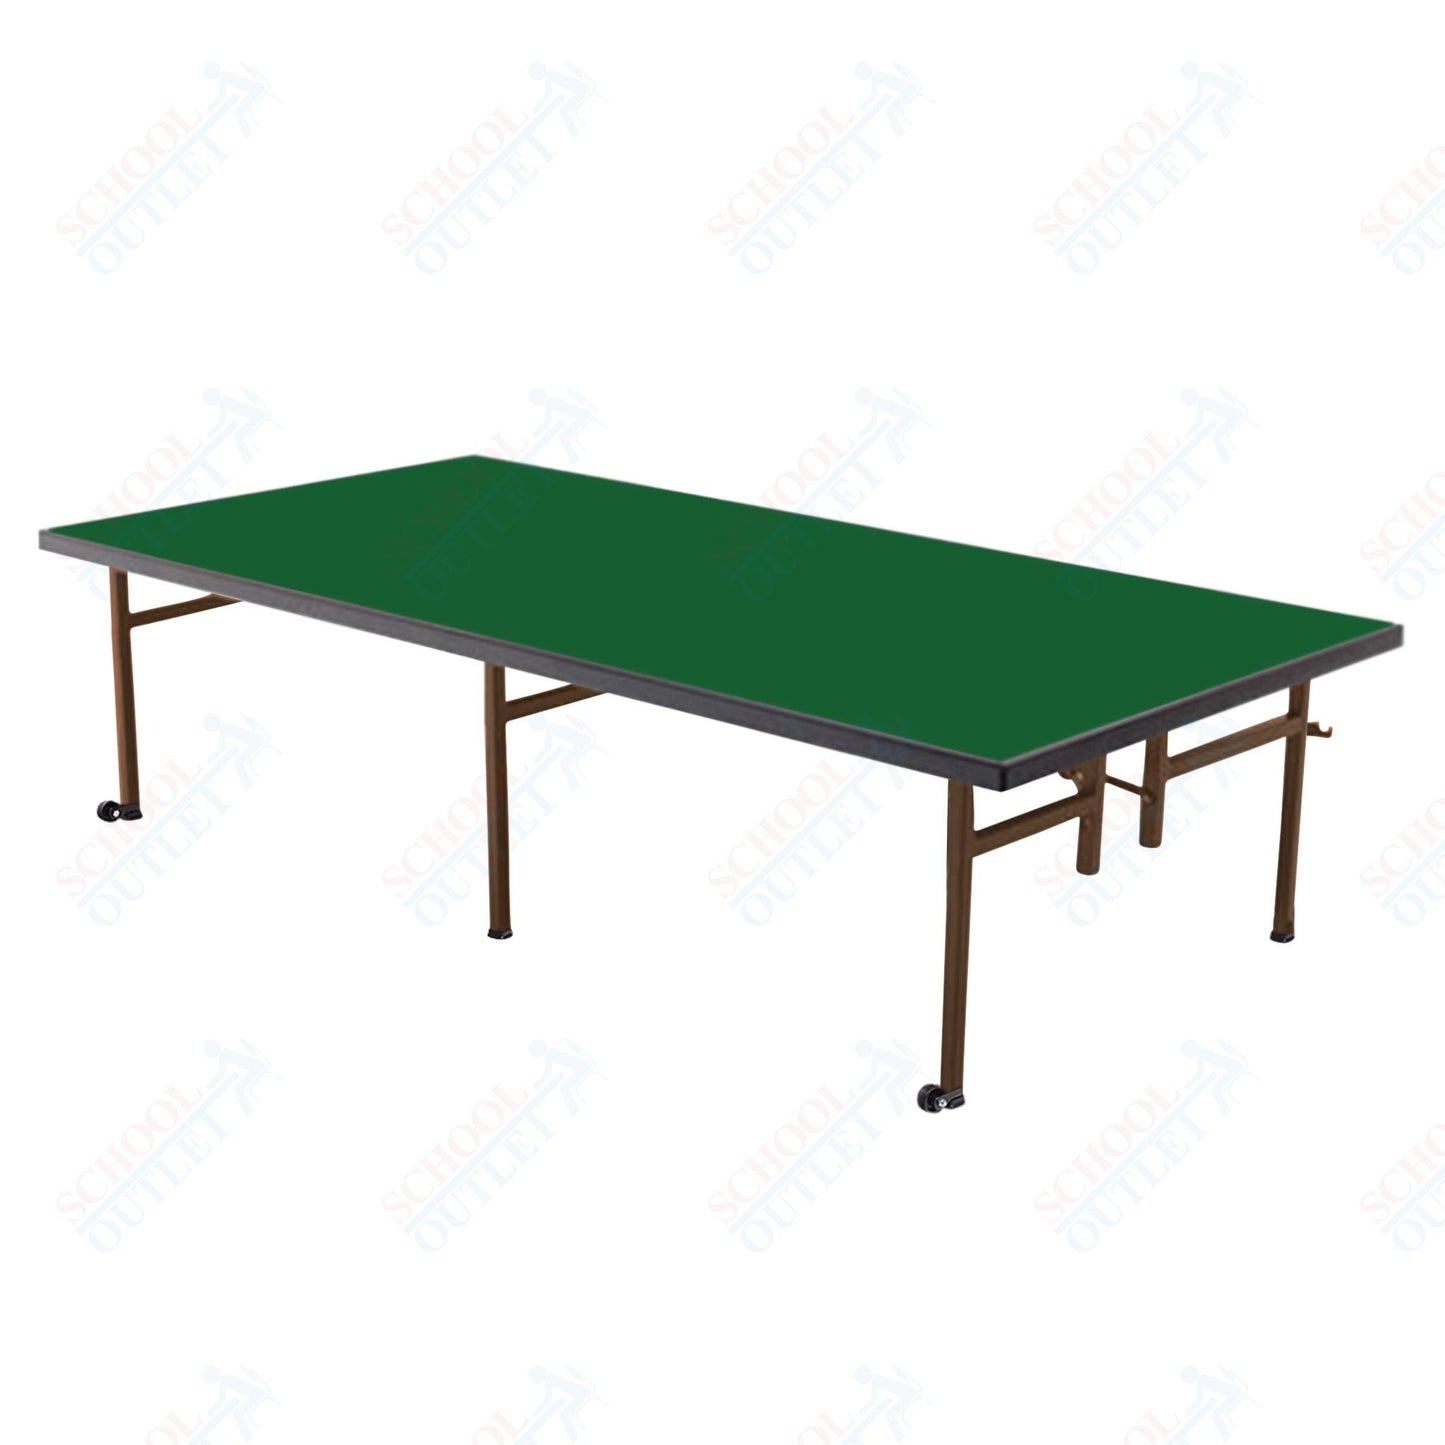 AmTab Fixed Height Stage - Carpet Top - 36"W x 96"L x 8"H (AmTab AMT - ST3808C) - SchoolOutlet